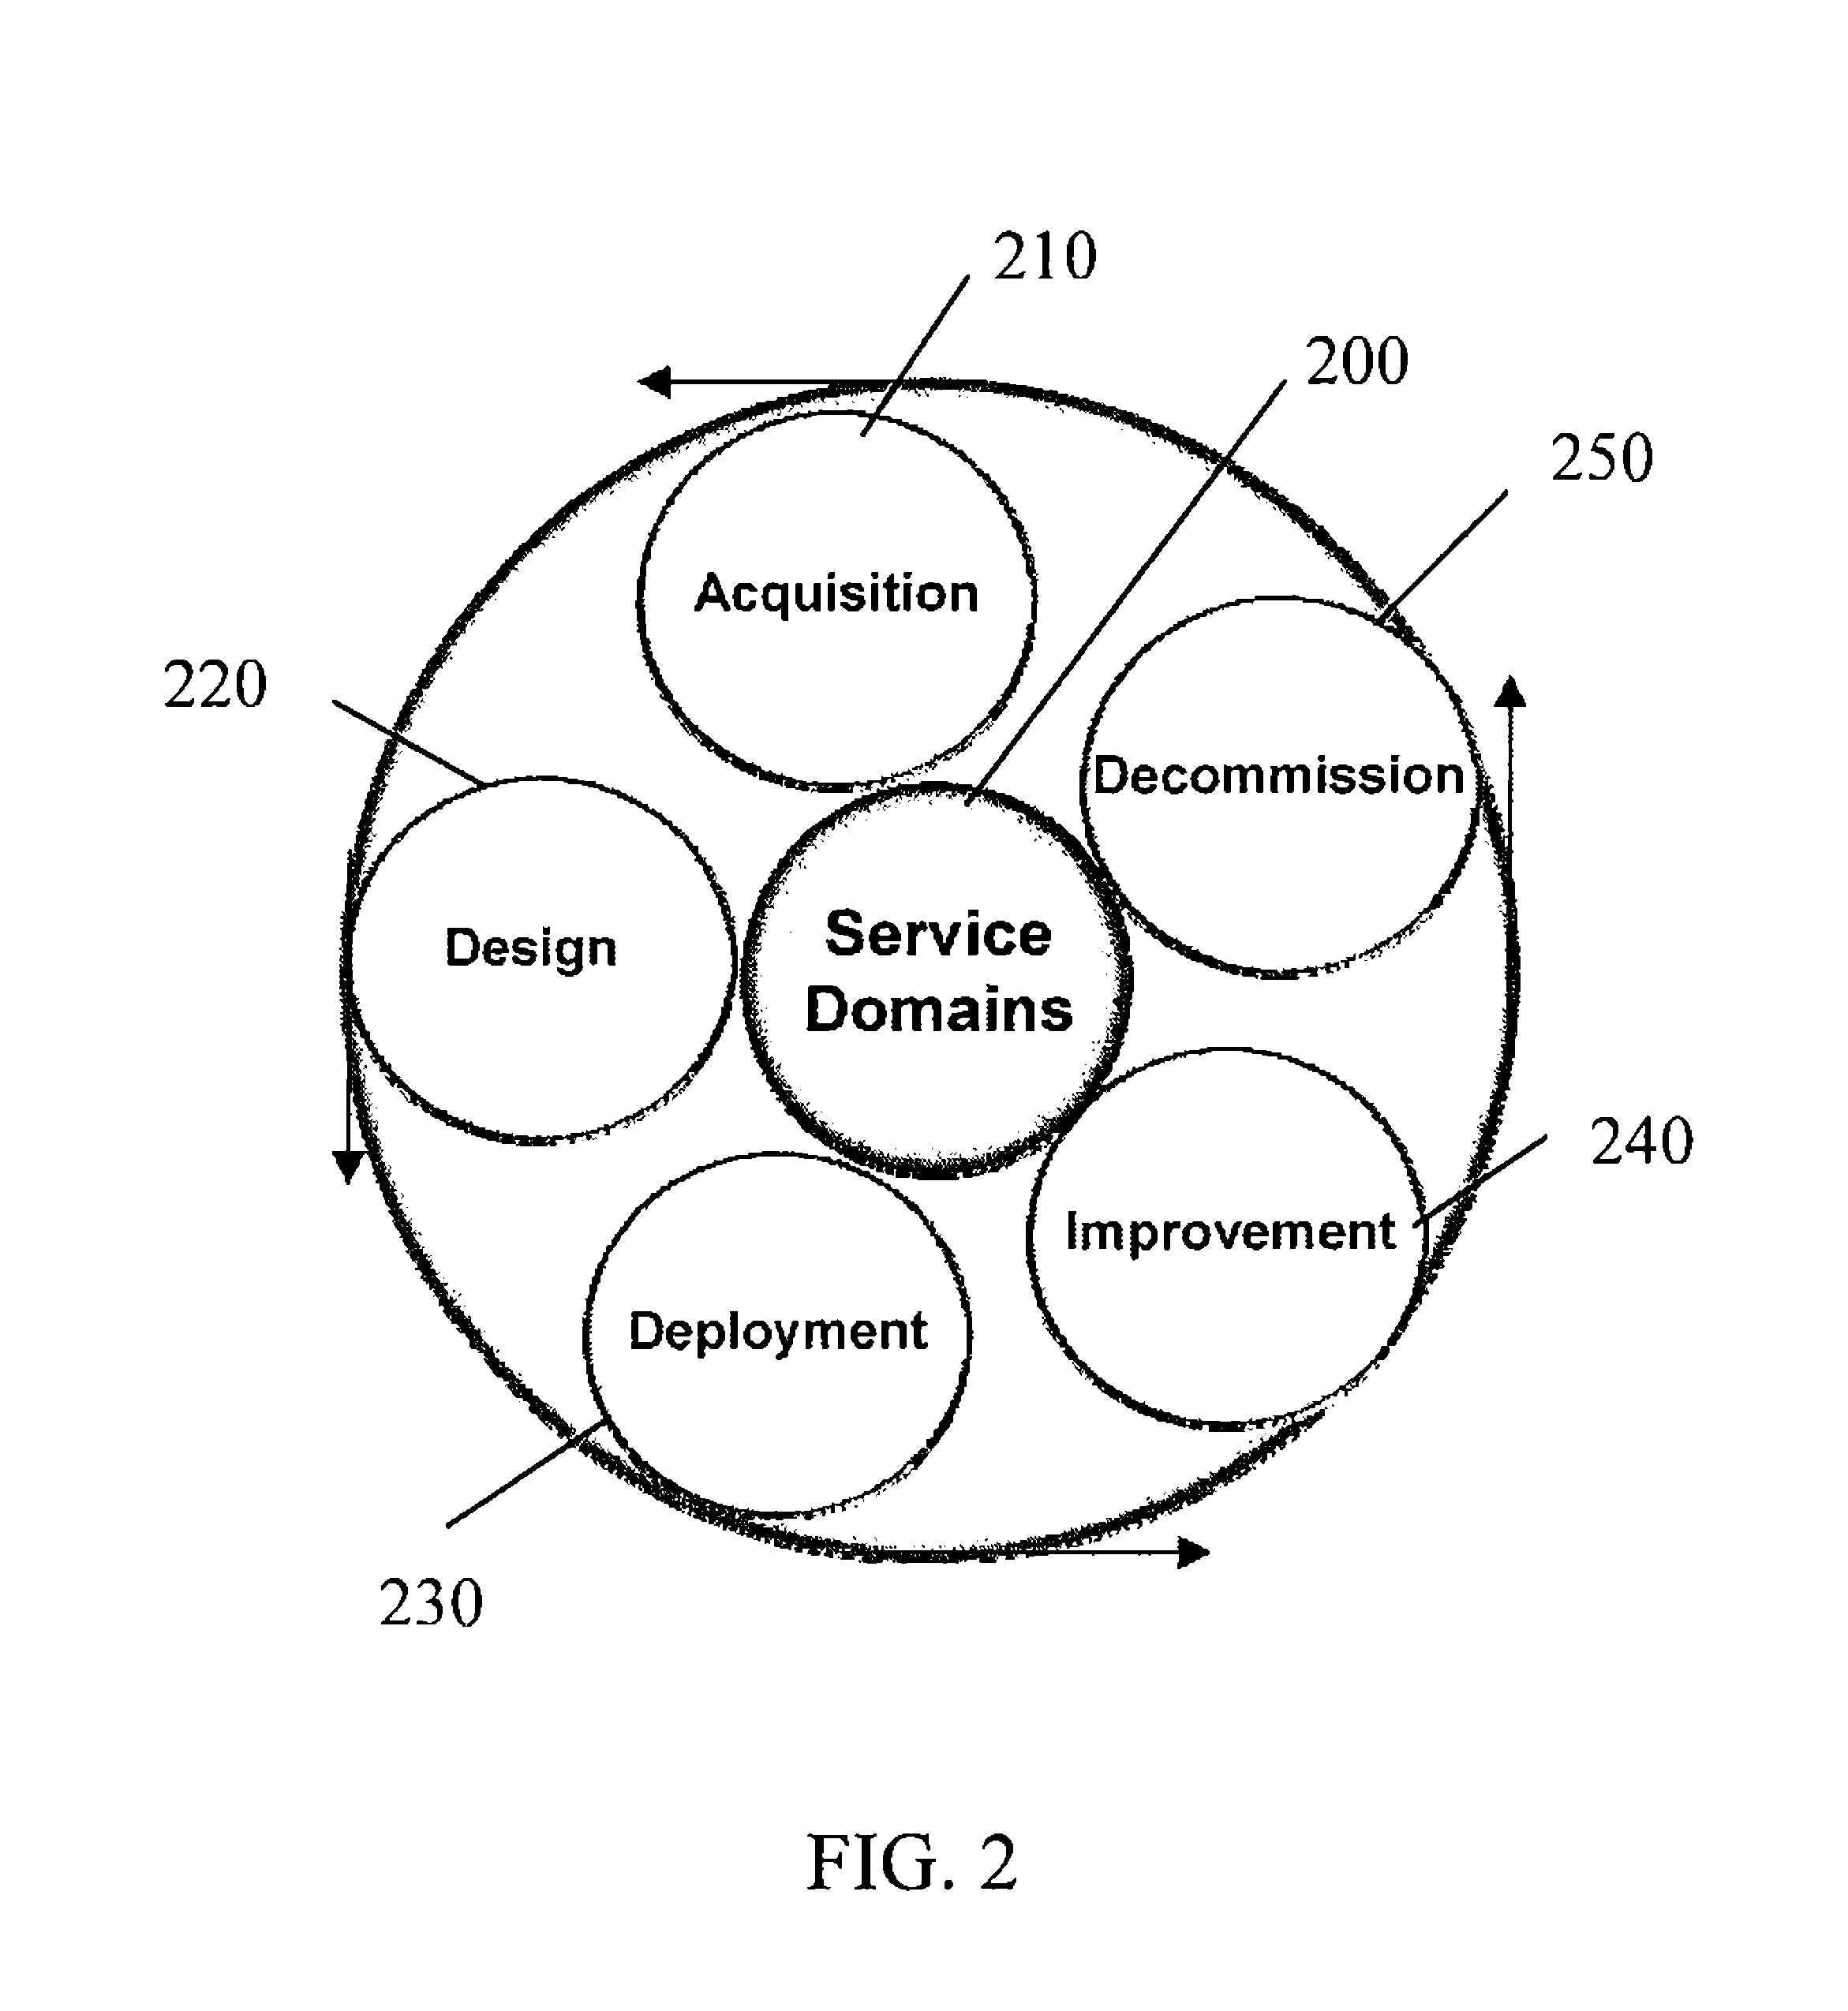 Method and computer program product for developing a process-oriented information technology (IT) actionable service catalog for managing lifecycle of services